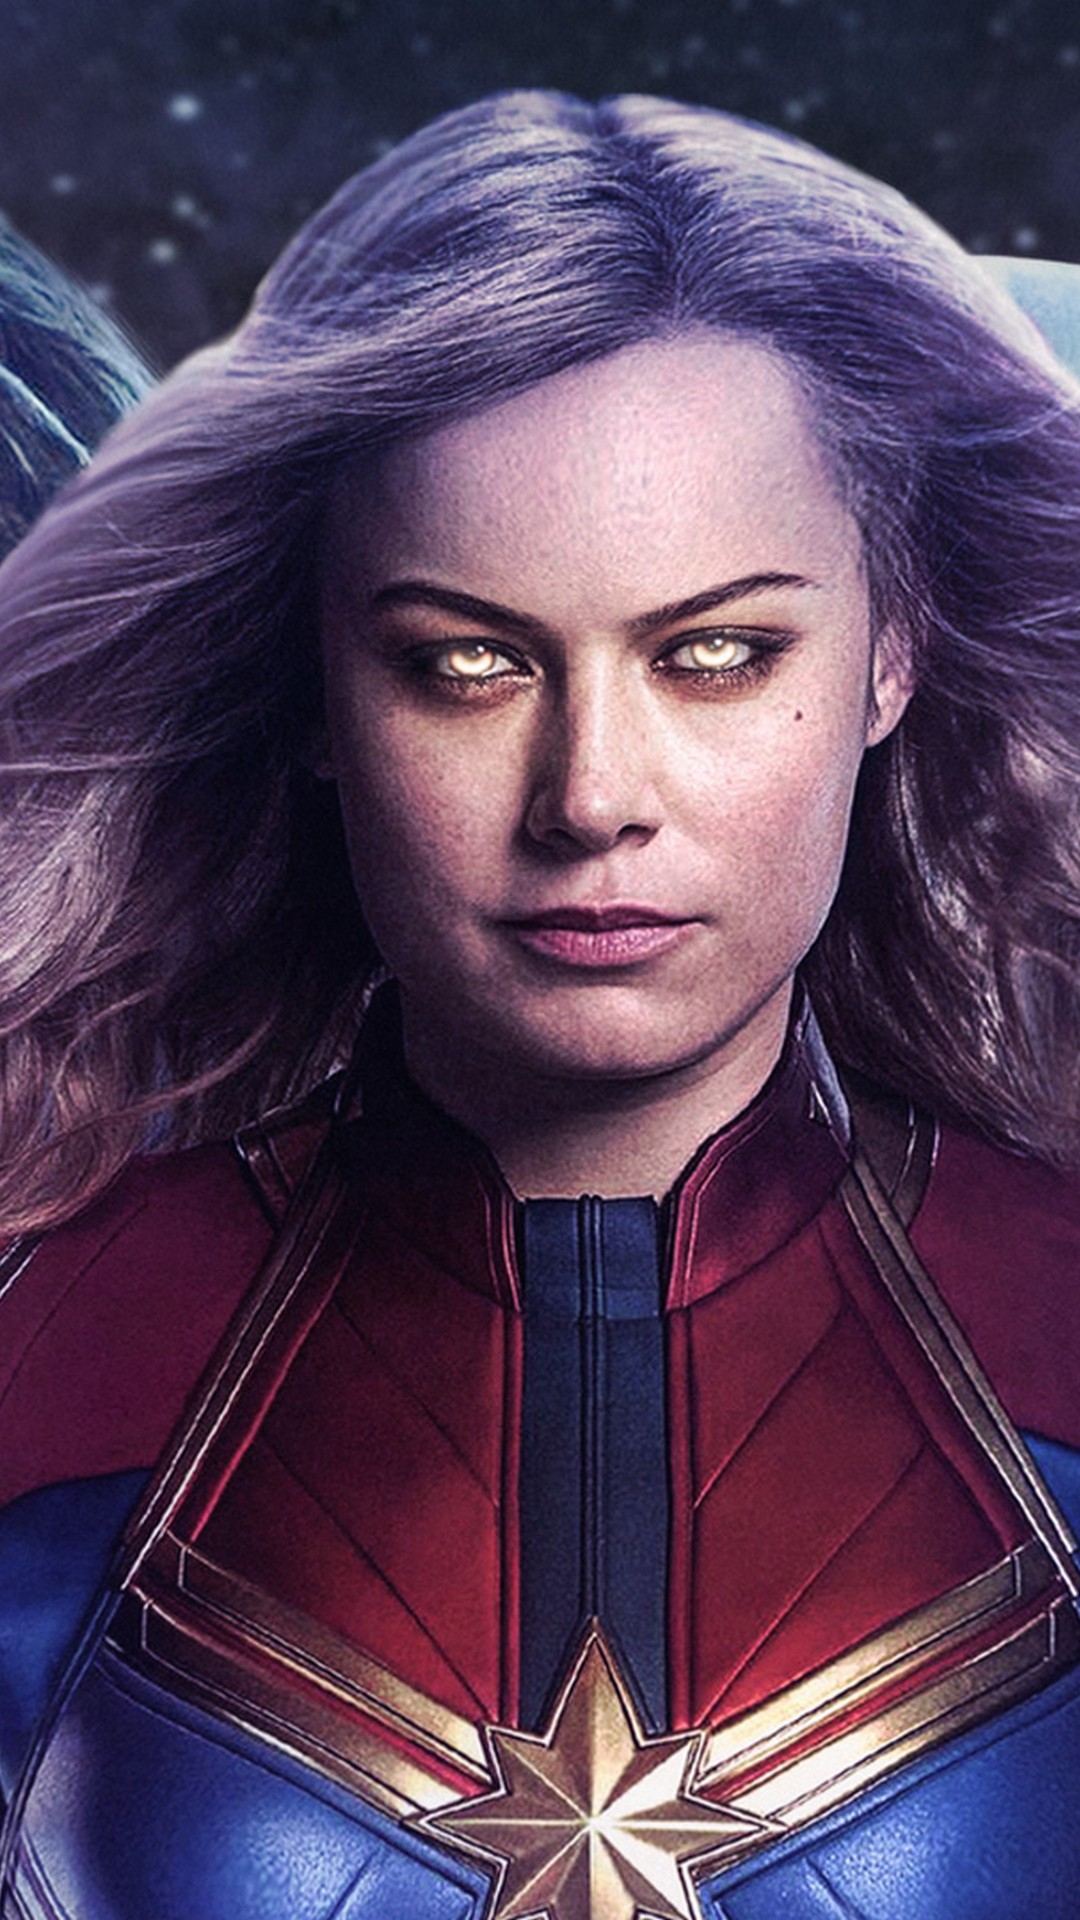 Captain Marvel Avengers Endgame iPhone Wallpaper with high-resolution 1080x1920 pixel. You can use this poster wallpaper for your Desktop Computers, Mac Screensavers, Windows Backgrounds, iPhone Wallpapers, Tablet or Android Lock screen and another Mobile device